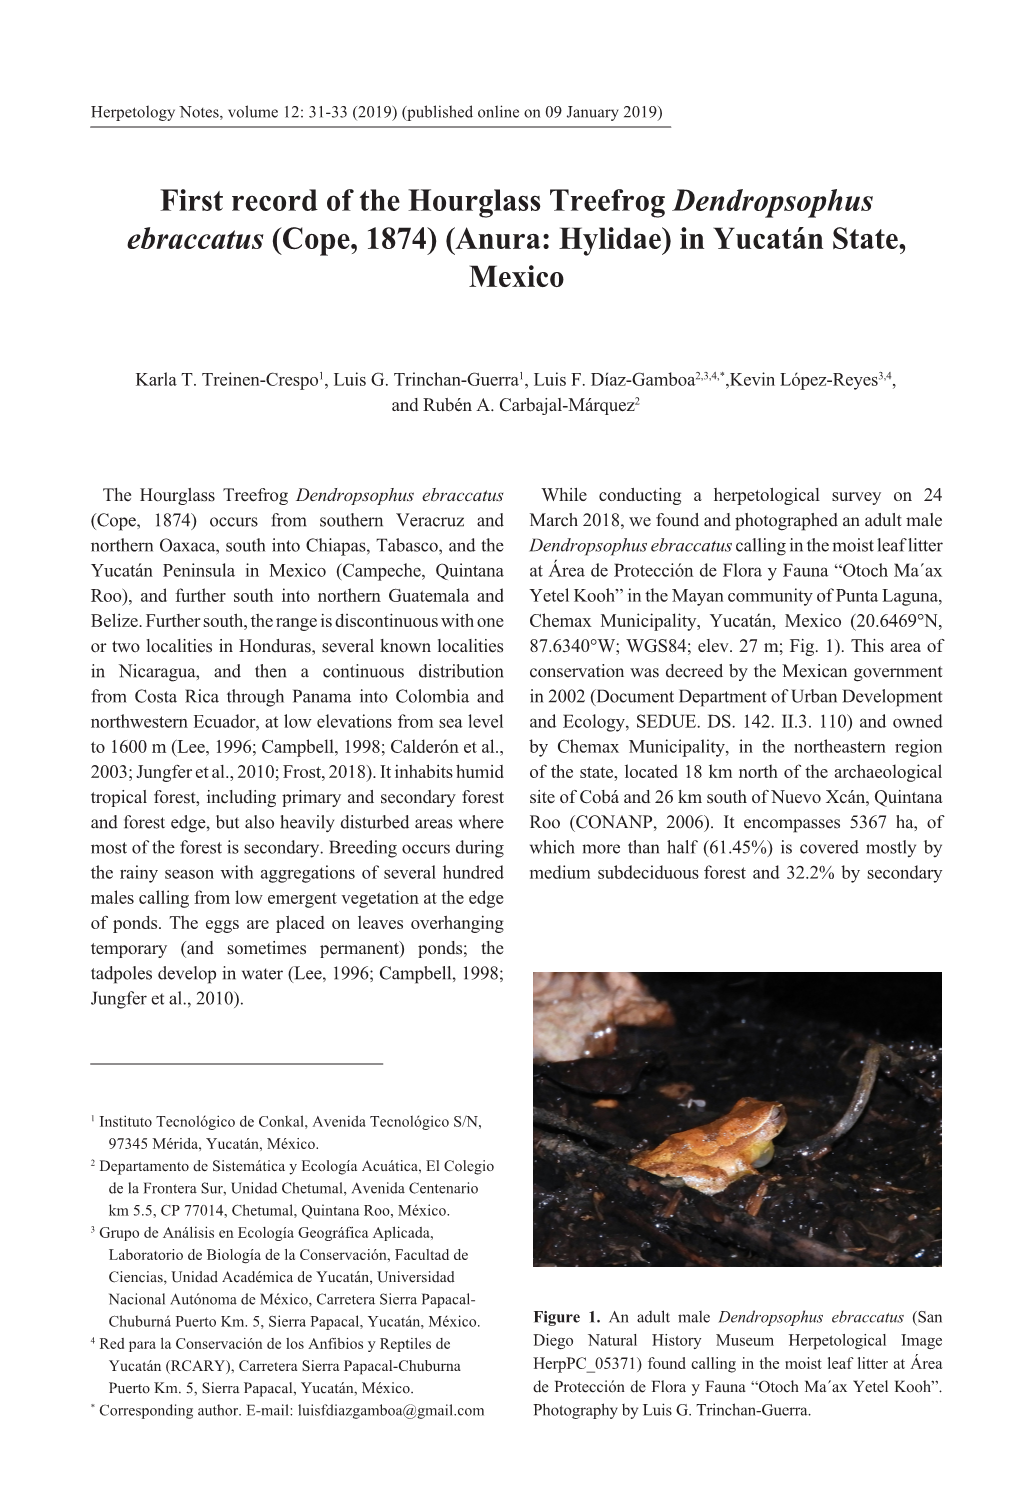 First Record of the Hourglass Treefrog Dendropsophus Ebraccatus (Cope, 1874) (Anura: Hylidae) in Yucatán State, Mexico